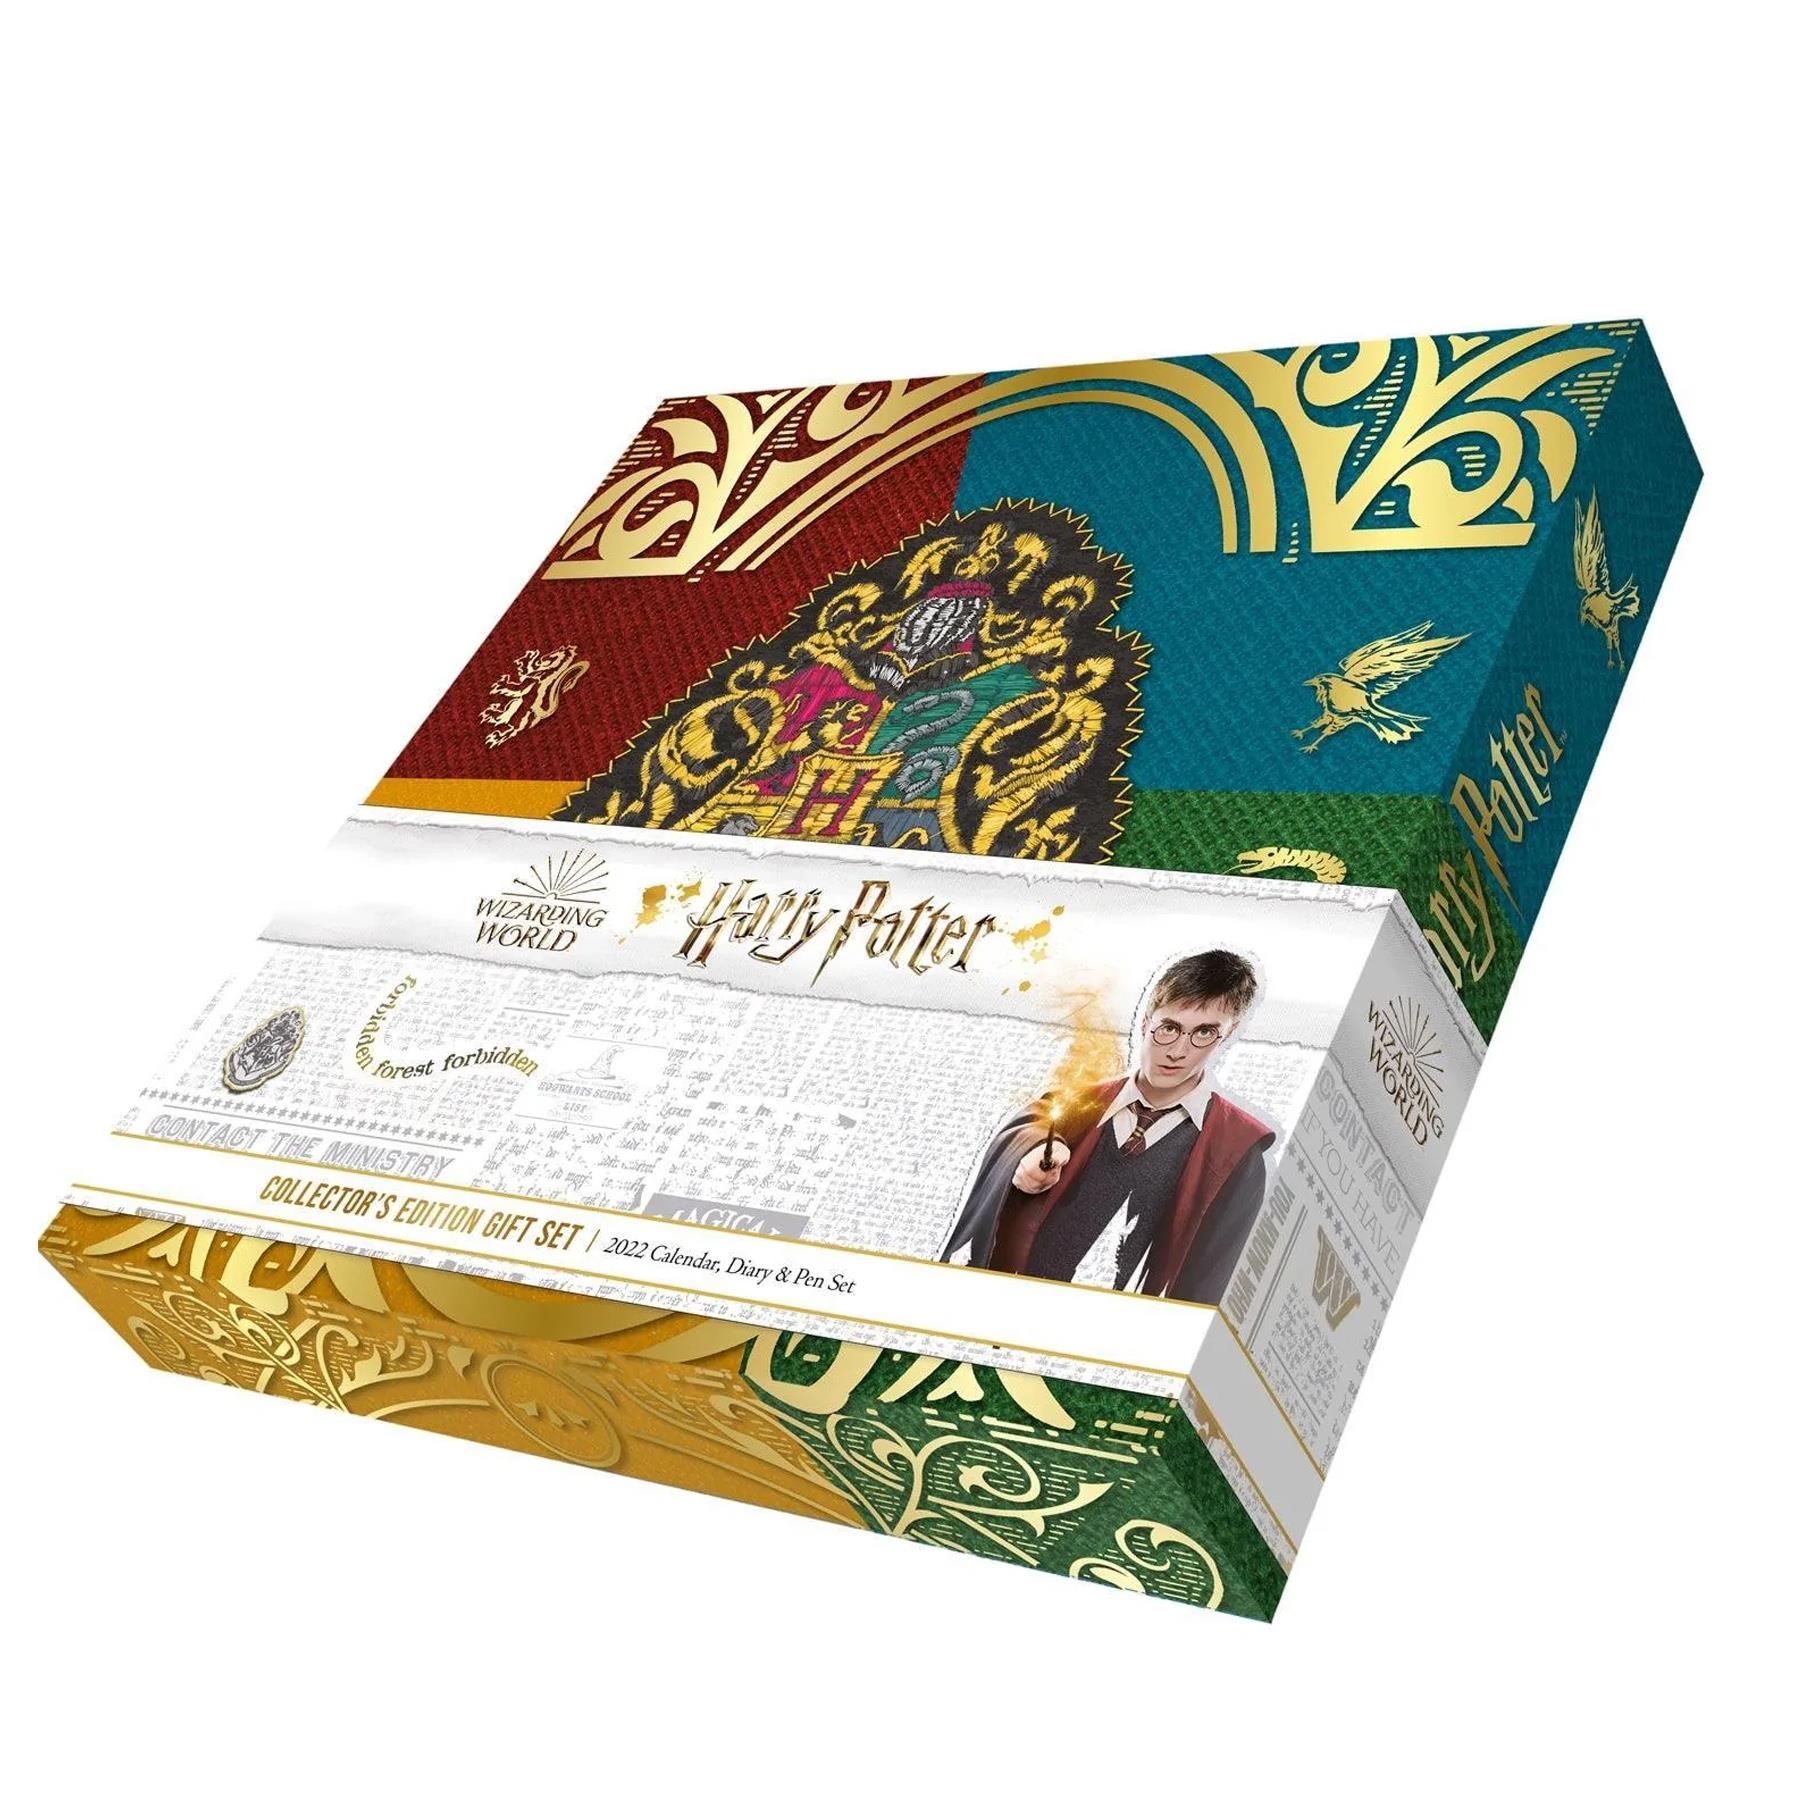 Harry Potter 2023 Calendar Diary and Pen Official Licensed Gift Box Set